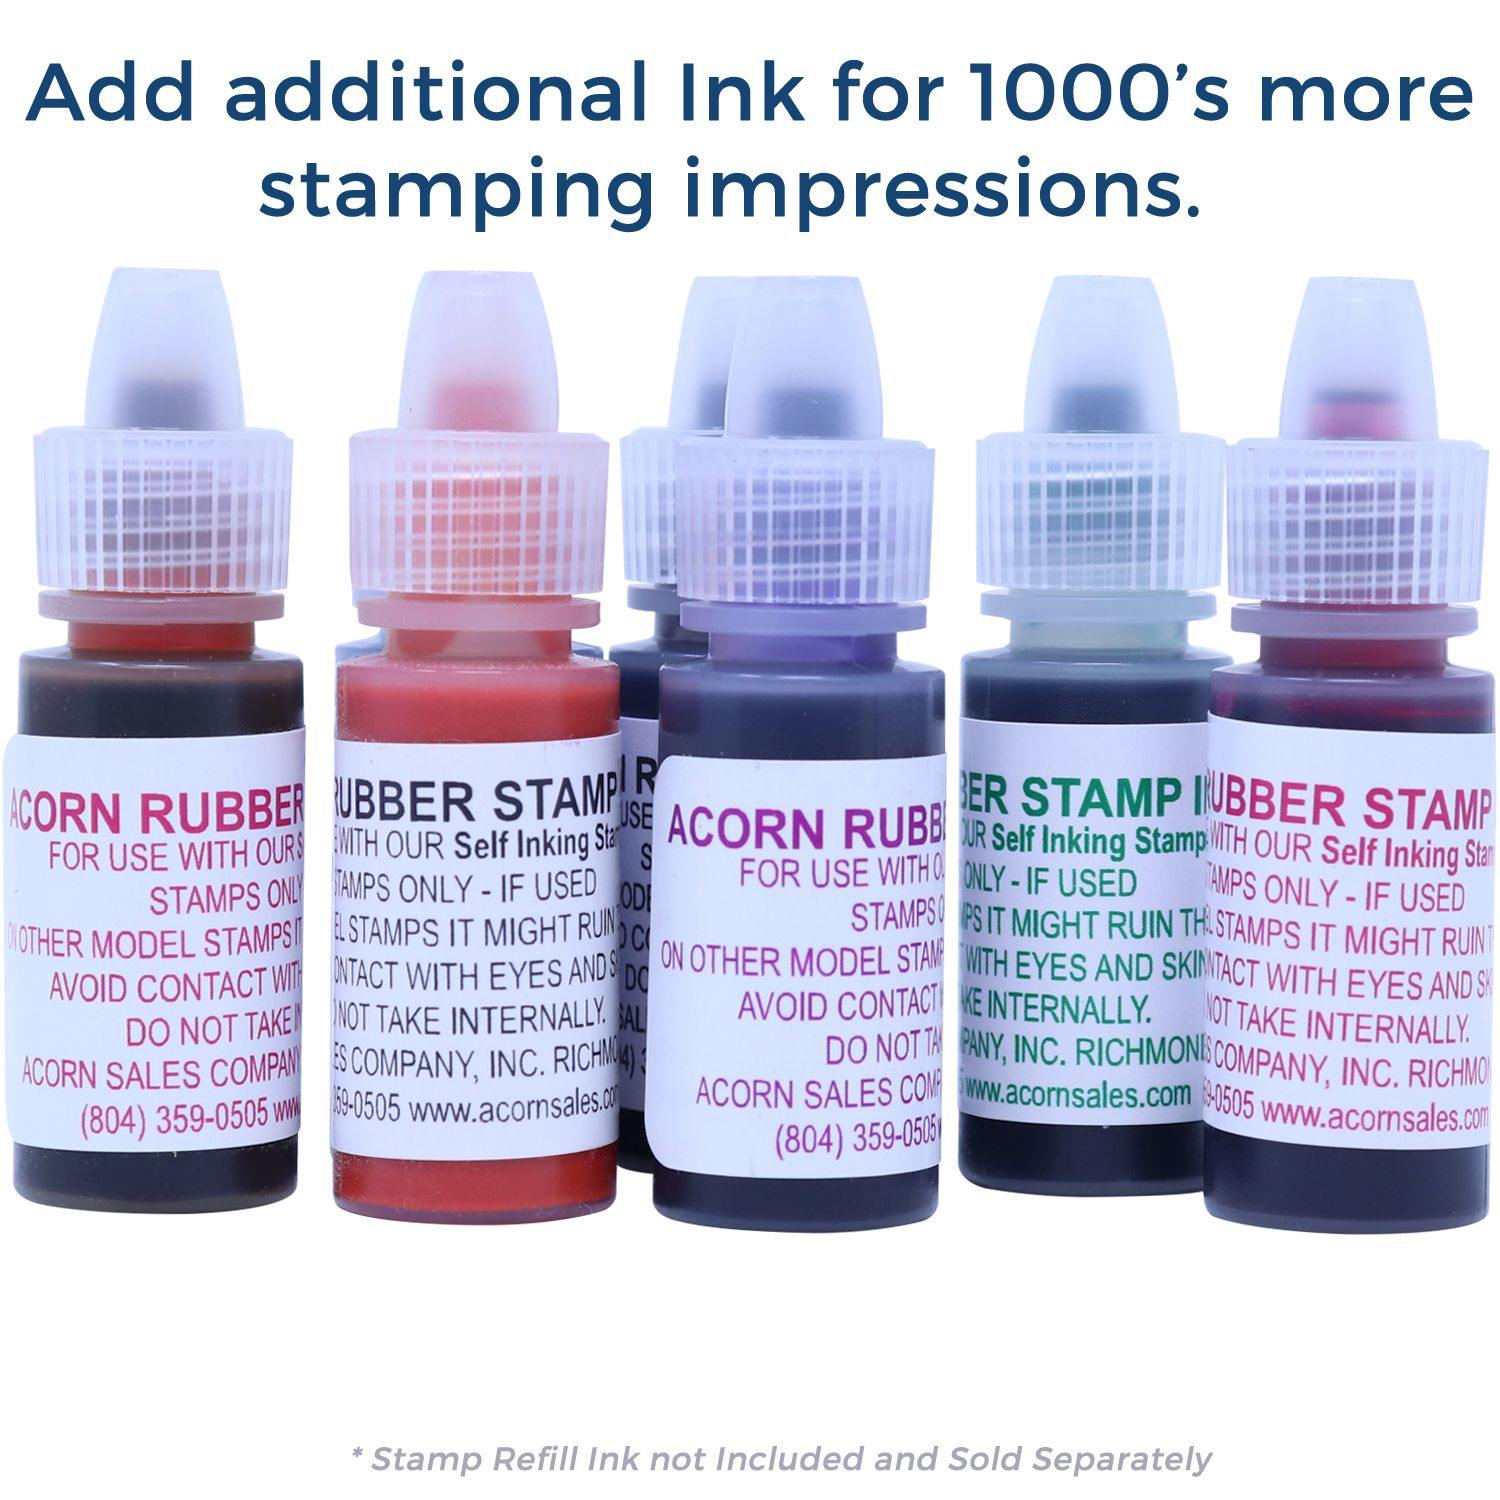 Refill Inks for Large Pre-Inked Emailed with Mailbox Stamp Available